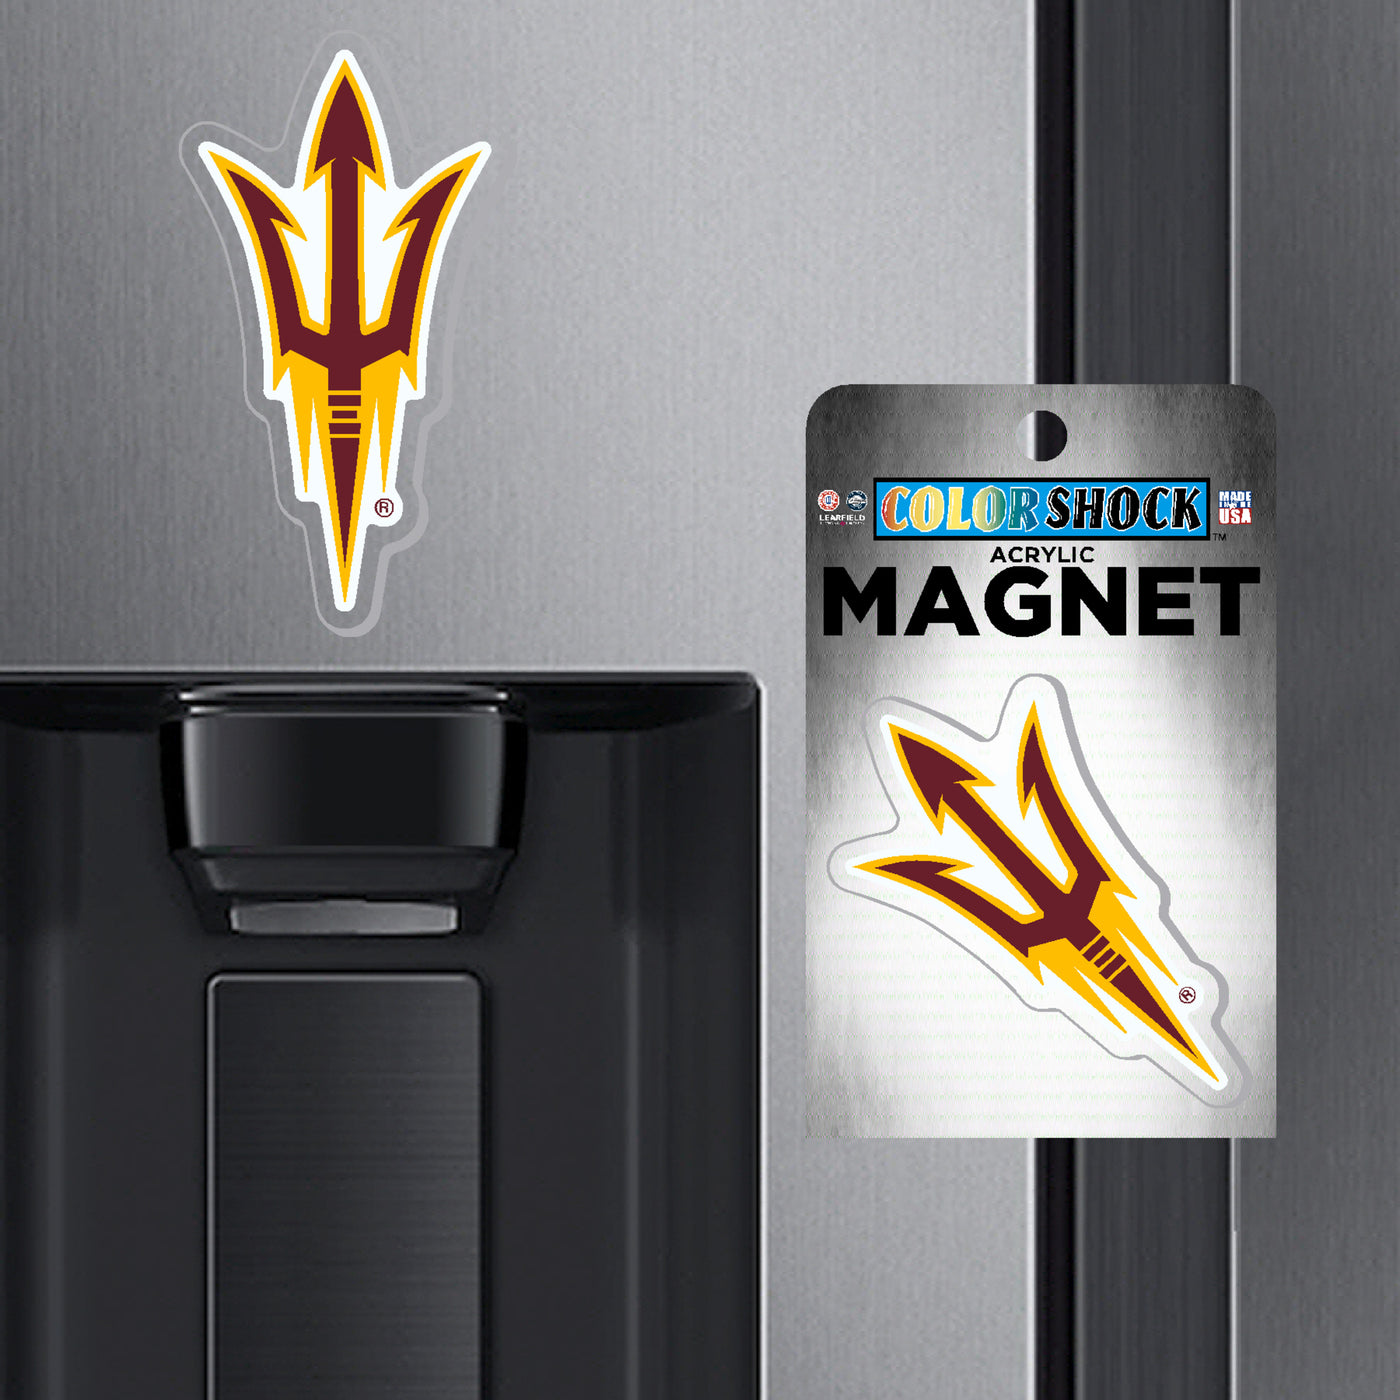 ASU pitchfork magnet on a fridge and another in packaging